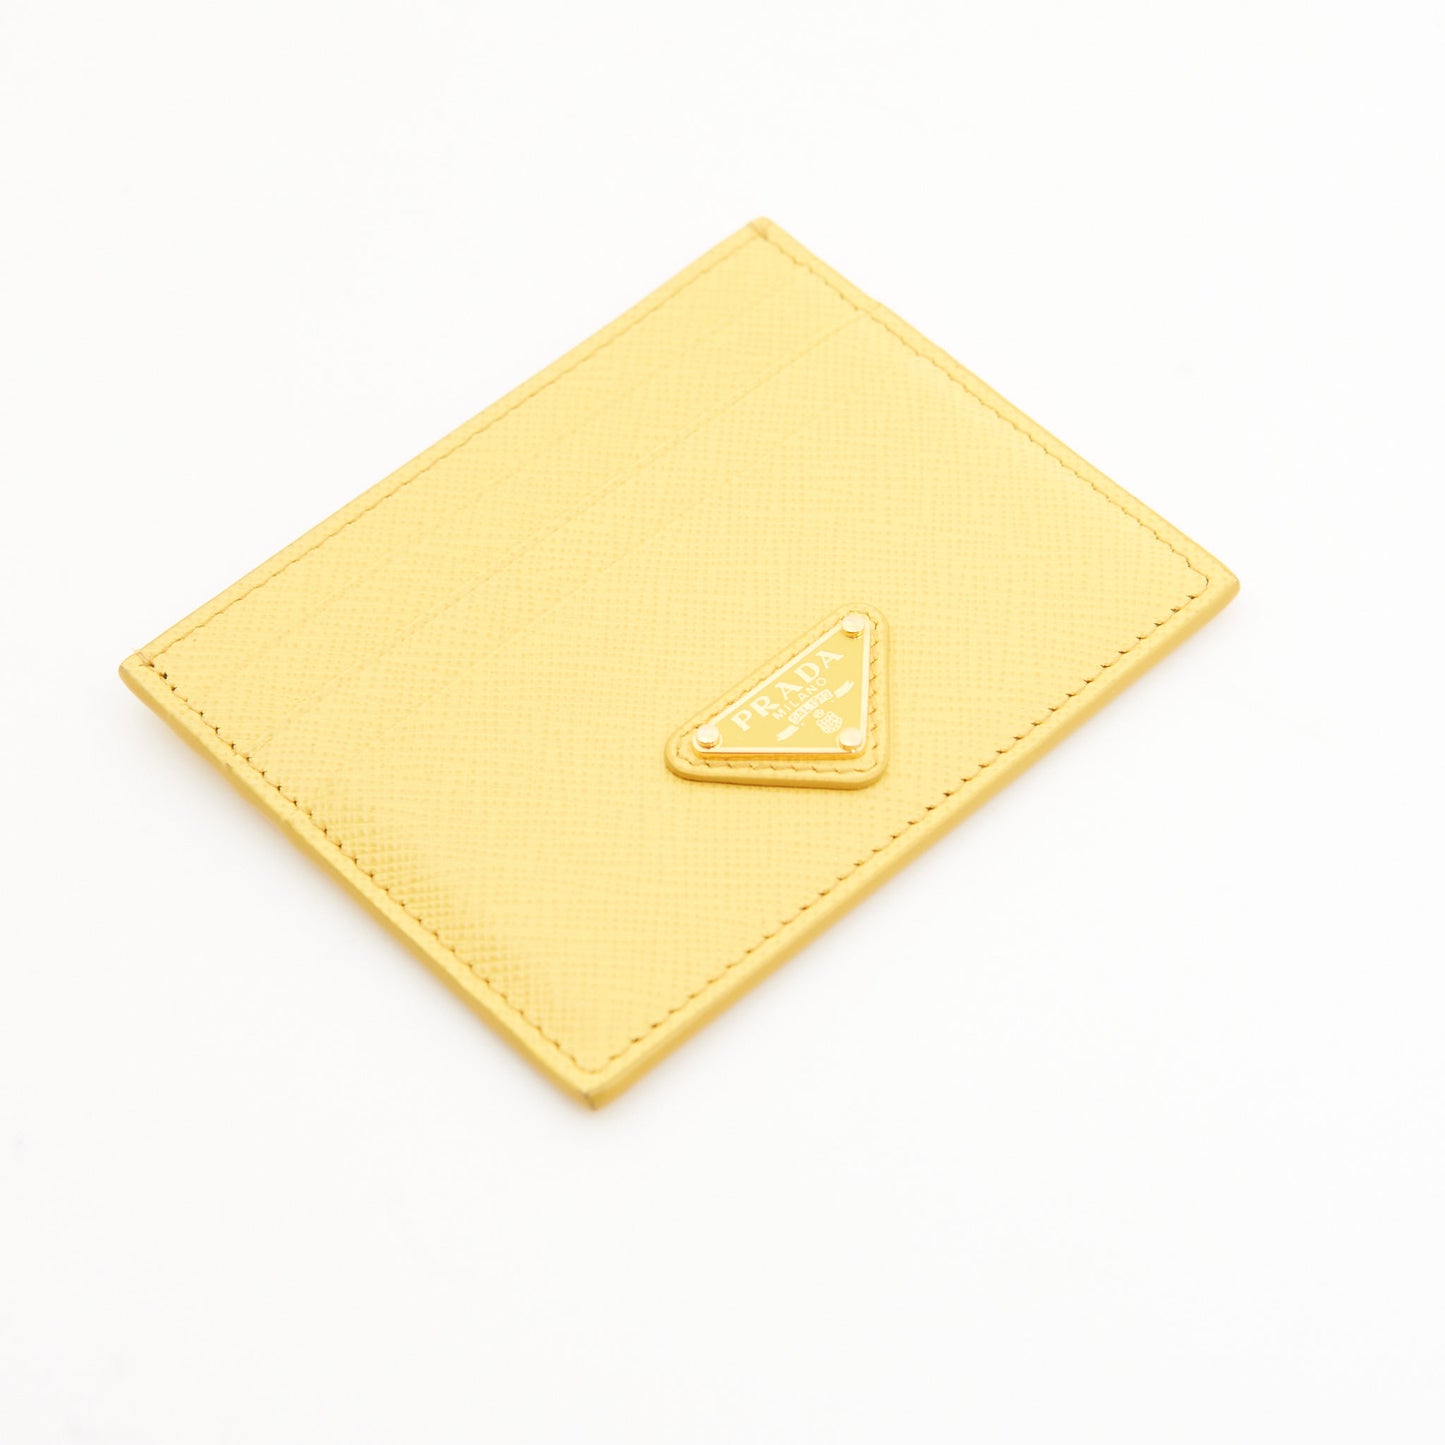 Prada Leather Saffiano Card Wallet in Yellow